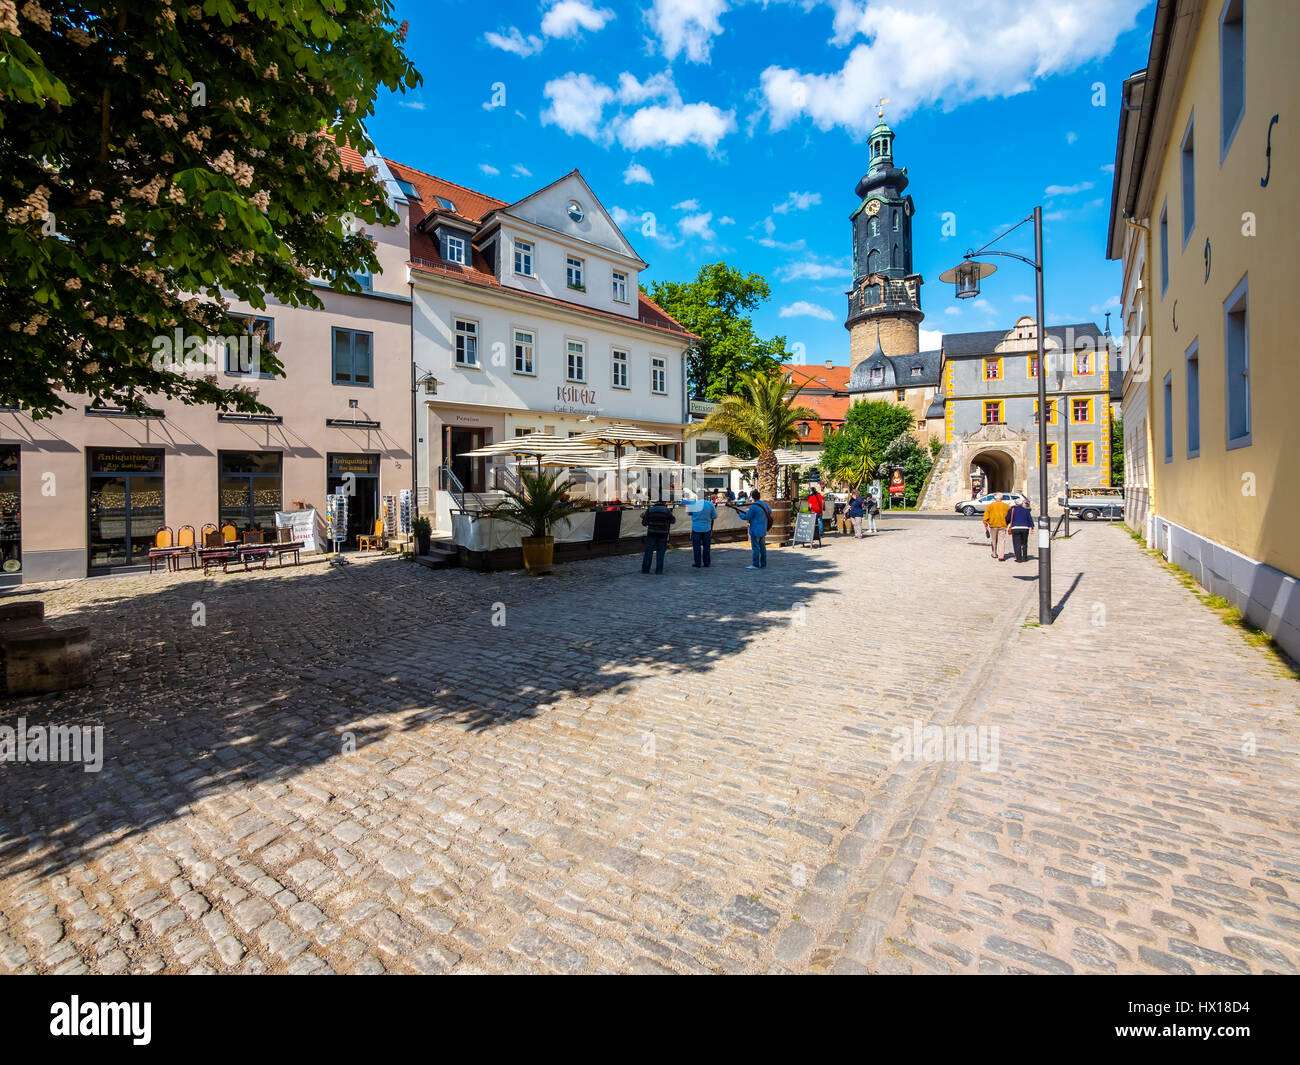 Germany, Weimar, Gruener Markt with city castle in the background Stock Photo